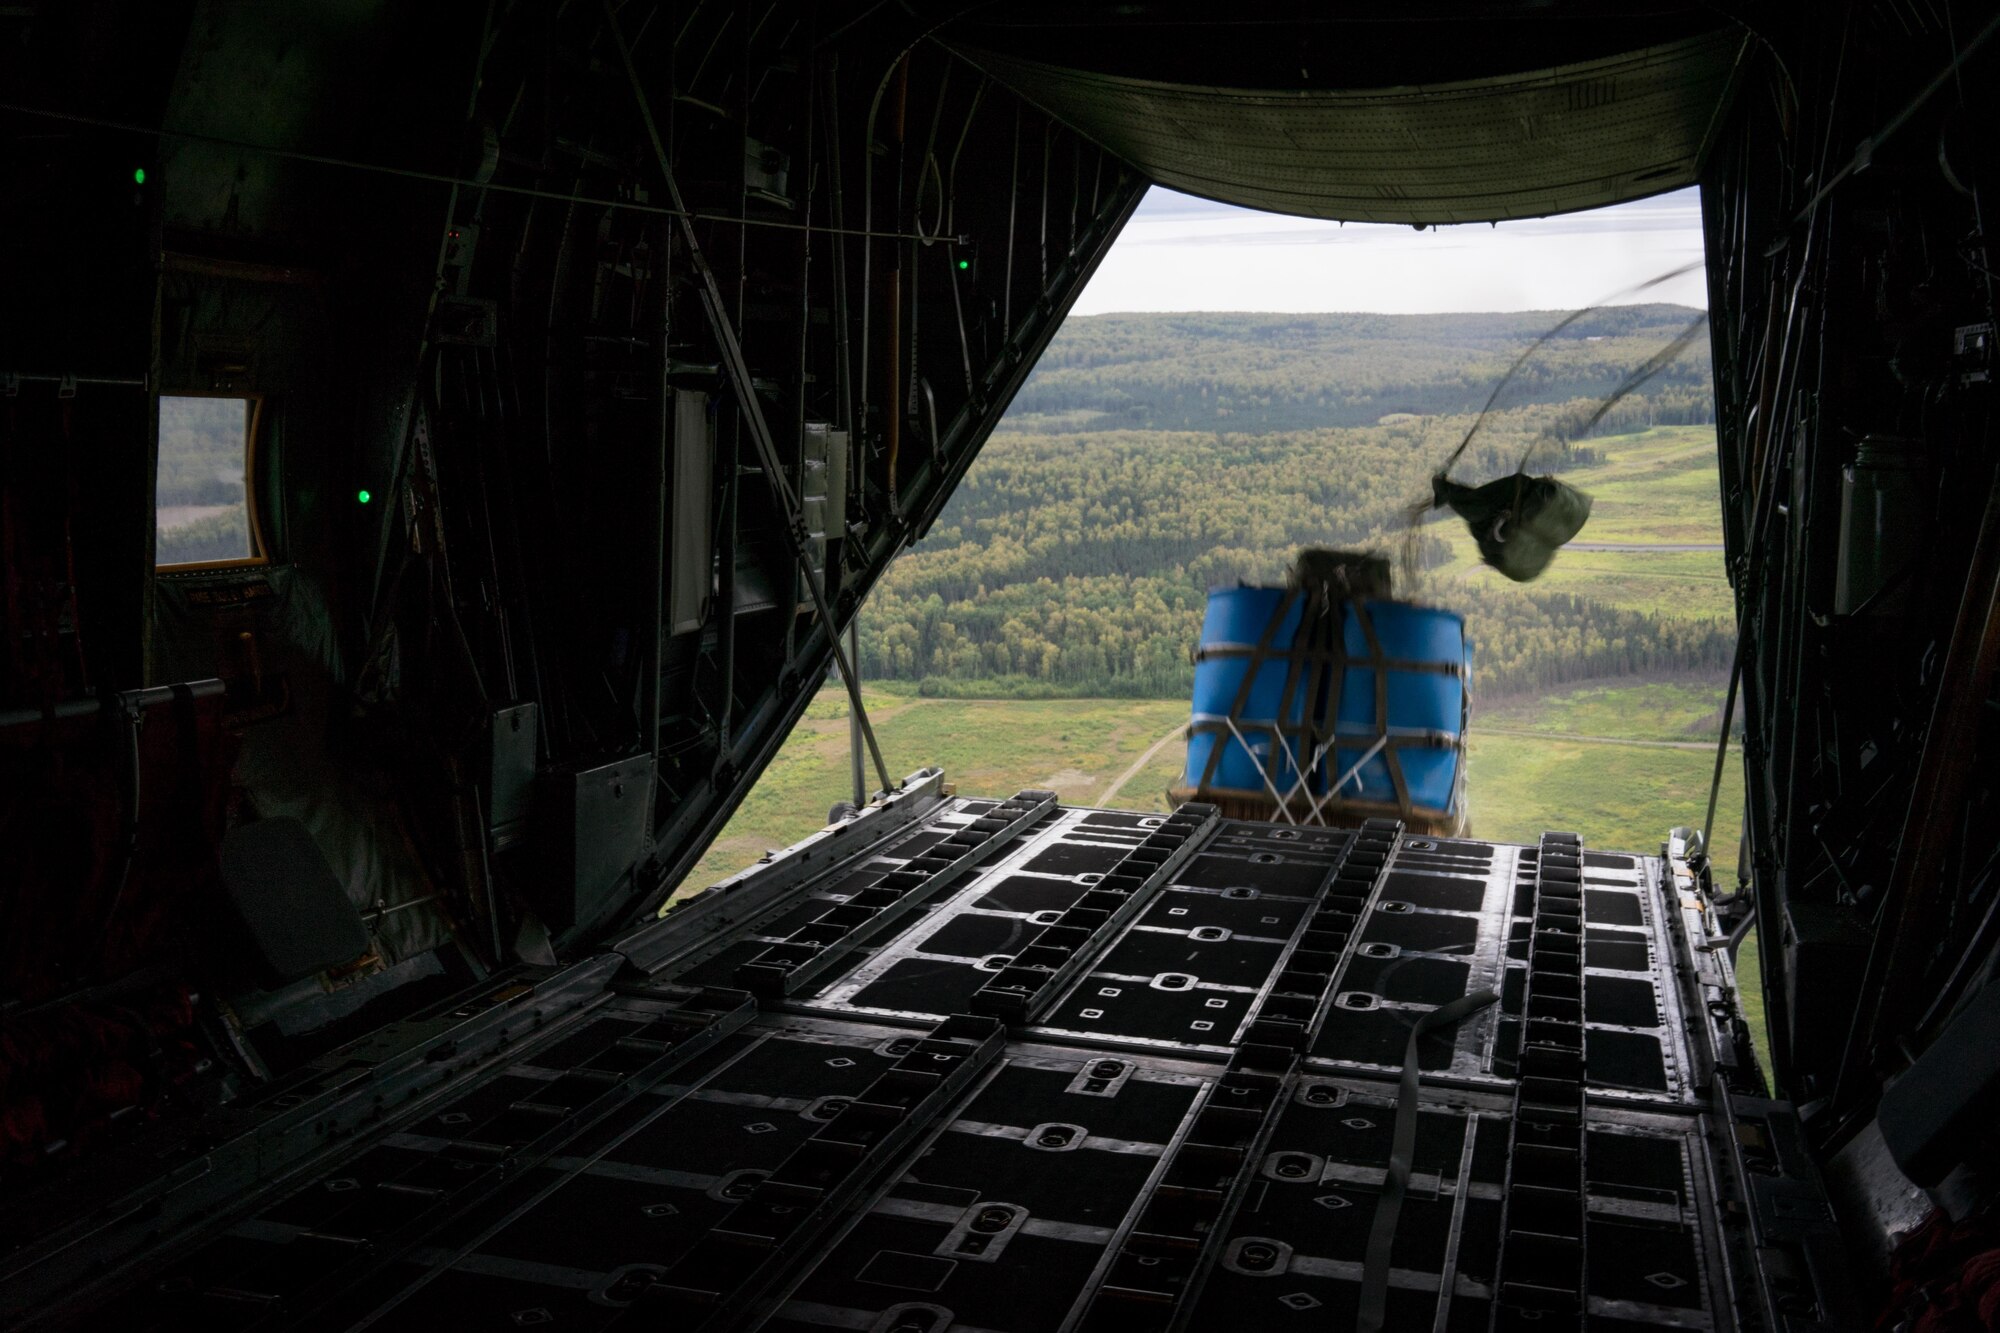 A container delivery system bundle drops from a C-130 Hercules during Red Flag Alaska on Joint Base Elmendorf-Richardson, Alaska, Aug. 12, 2016. Instead of being pushed out of the plane by a loadmaster, cds bundles are ejected using only the forward momentum of the aircraft. (U.S. Air Force photo by Staff Sgt. Michael Smith/Released)